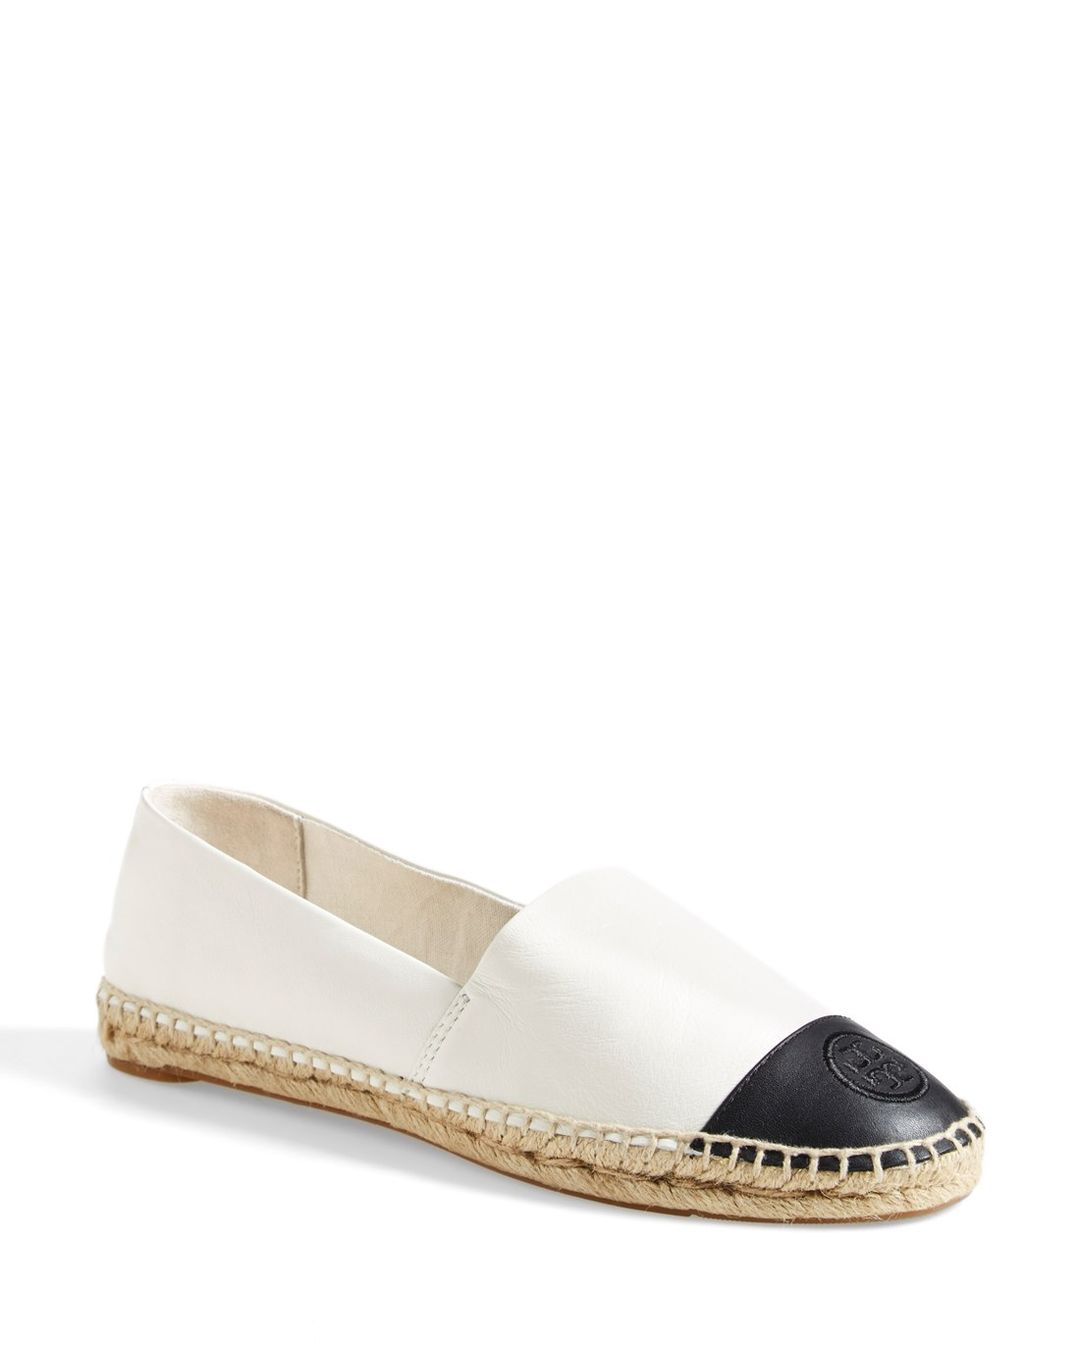 tory burch espadrilles leather